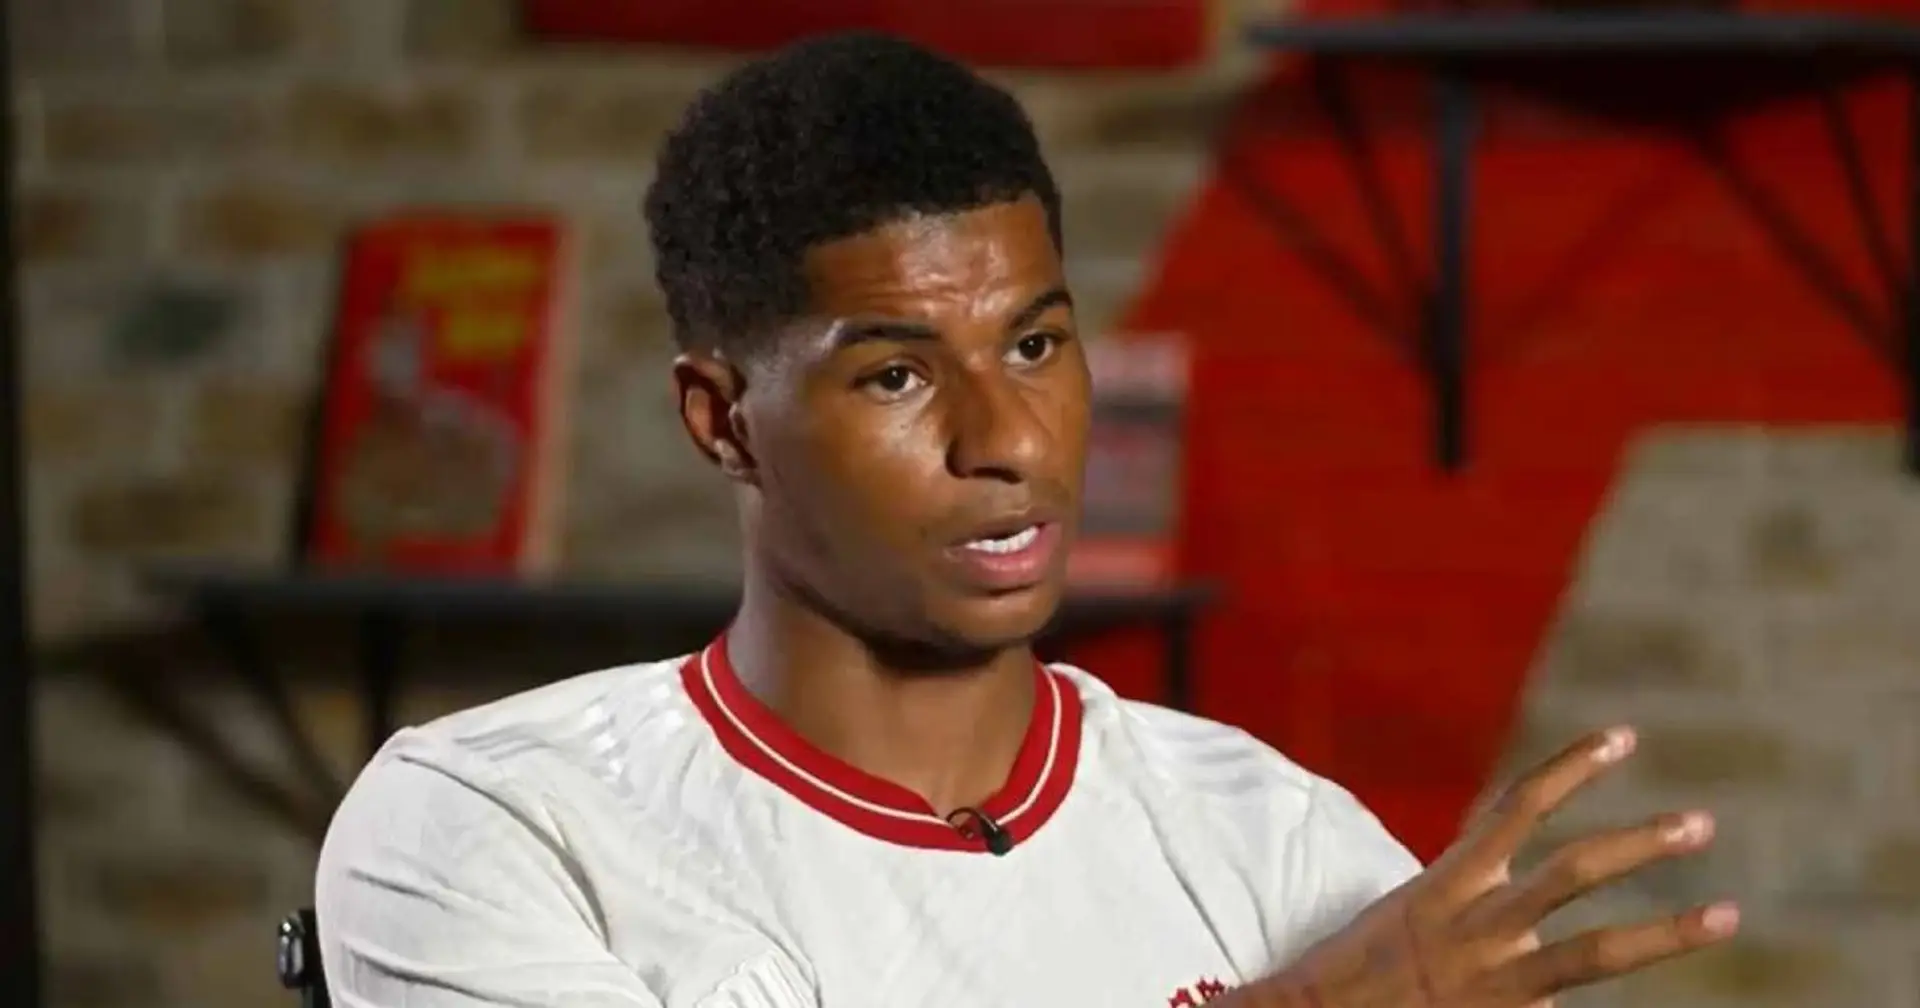 'Got to be about my car, my salary or jewellery': Rashford slams media for questioning Man United commitment